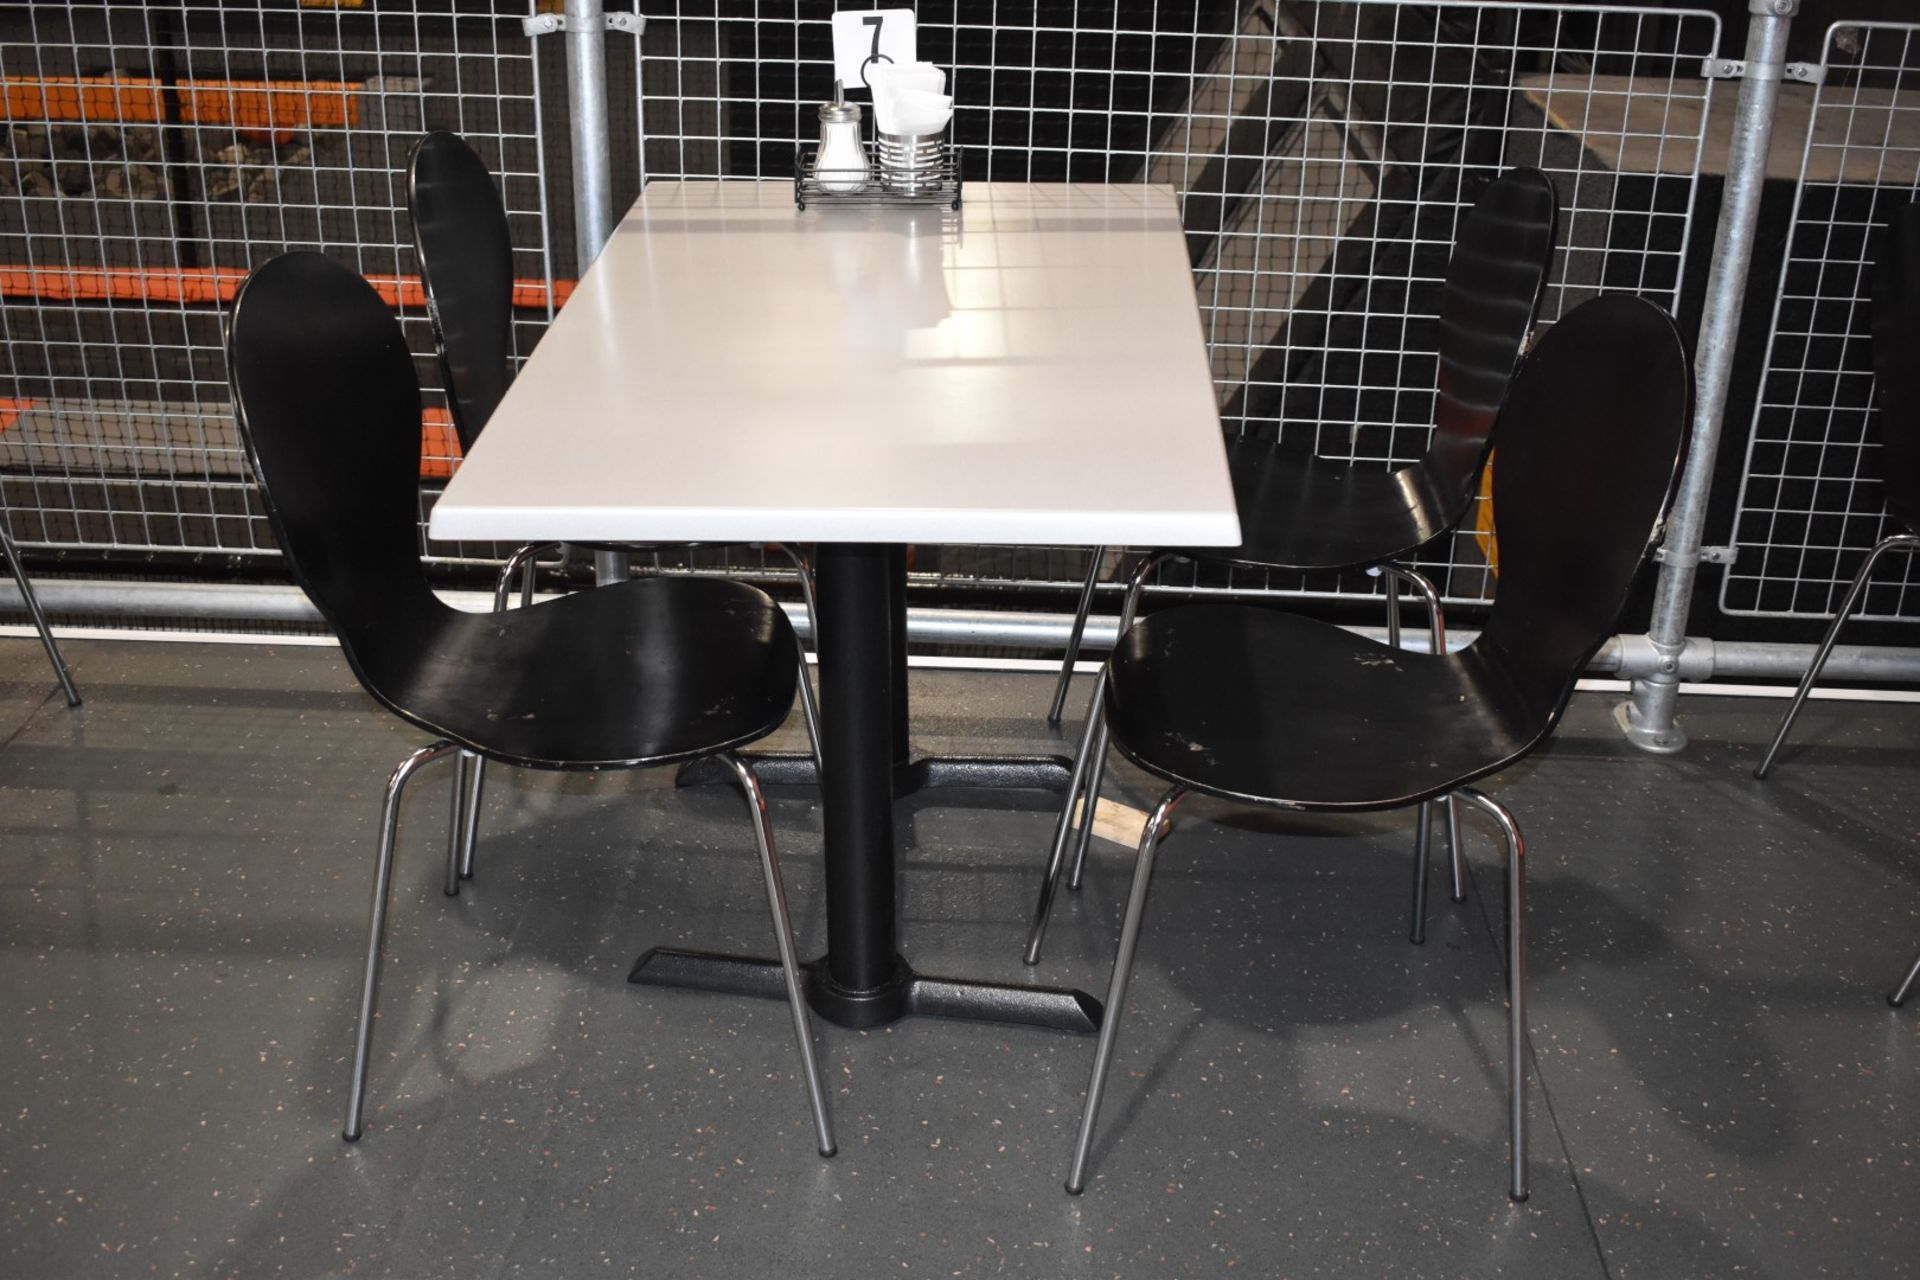 8 x Table and Chair Sets Suitable For Canteens, Cafes or Bistros - Includes 8 Tables and 24 Chairs - Image 9 of 15